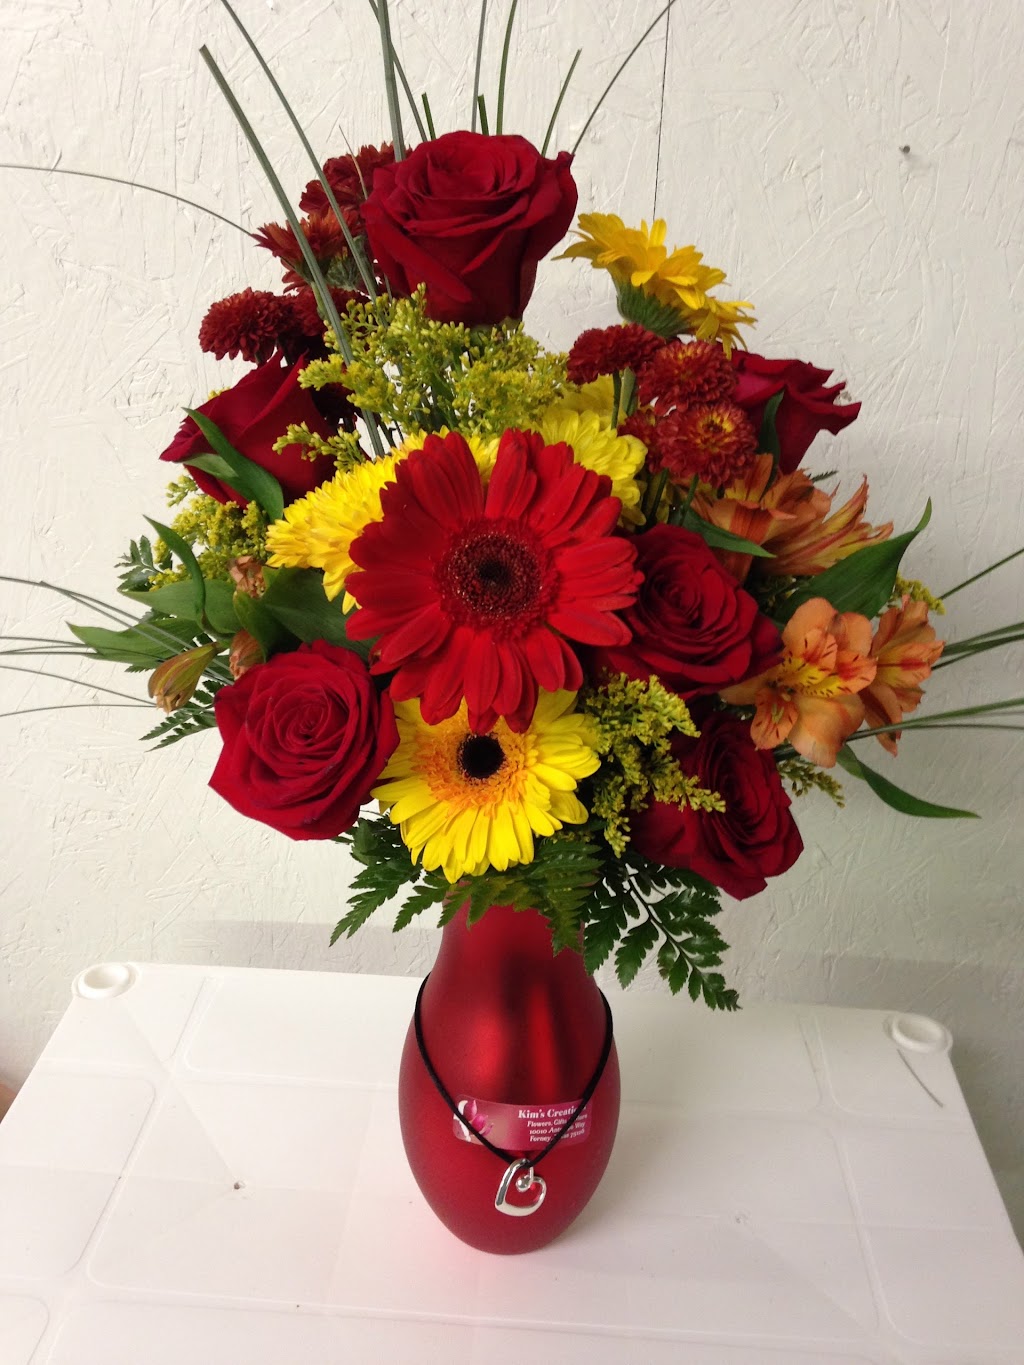 Kims Creations Flowers | 10010 Antelope Way, Forney, TX 75126, USA | Phone: (972) 357-7687